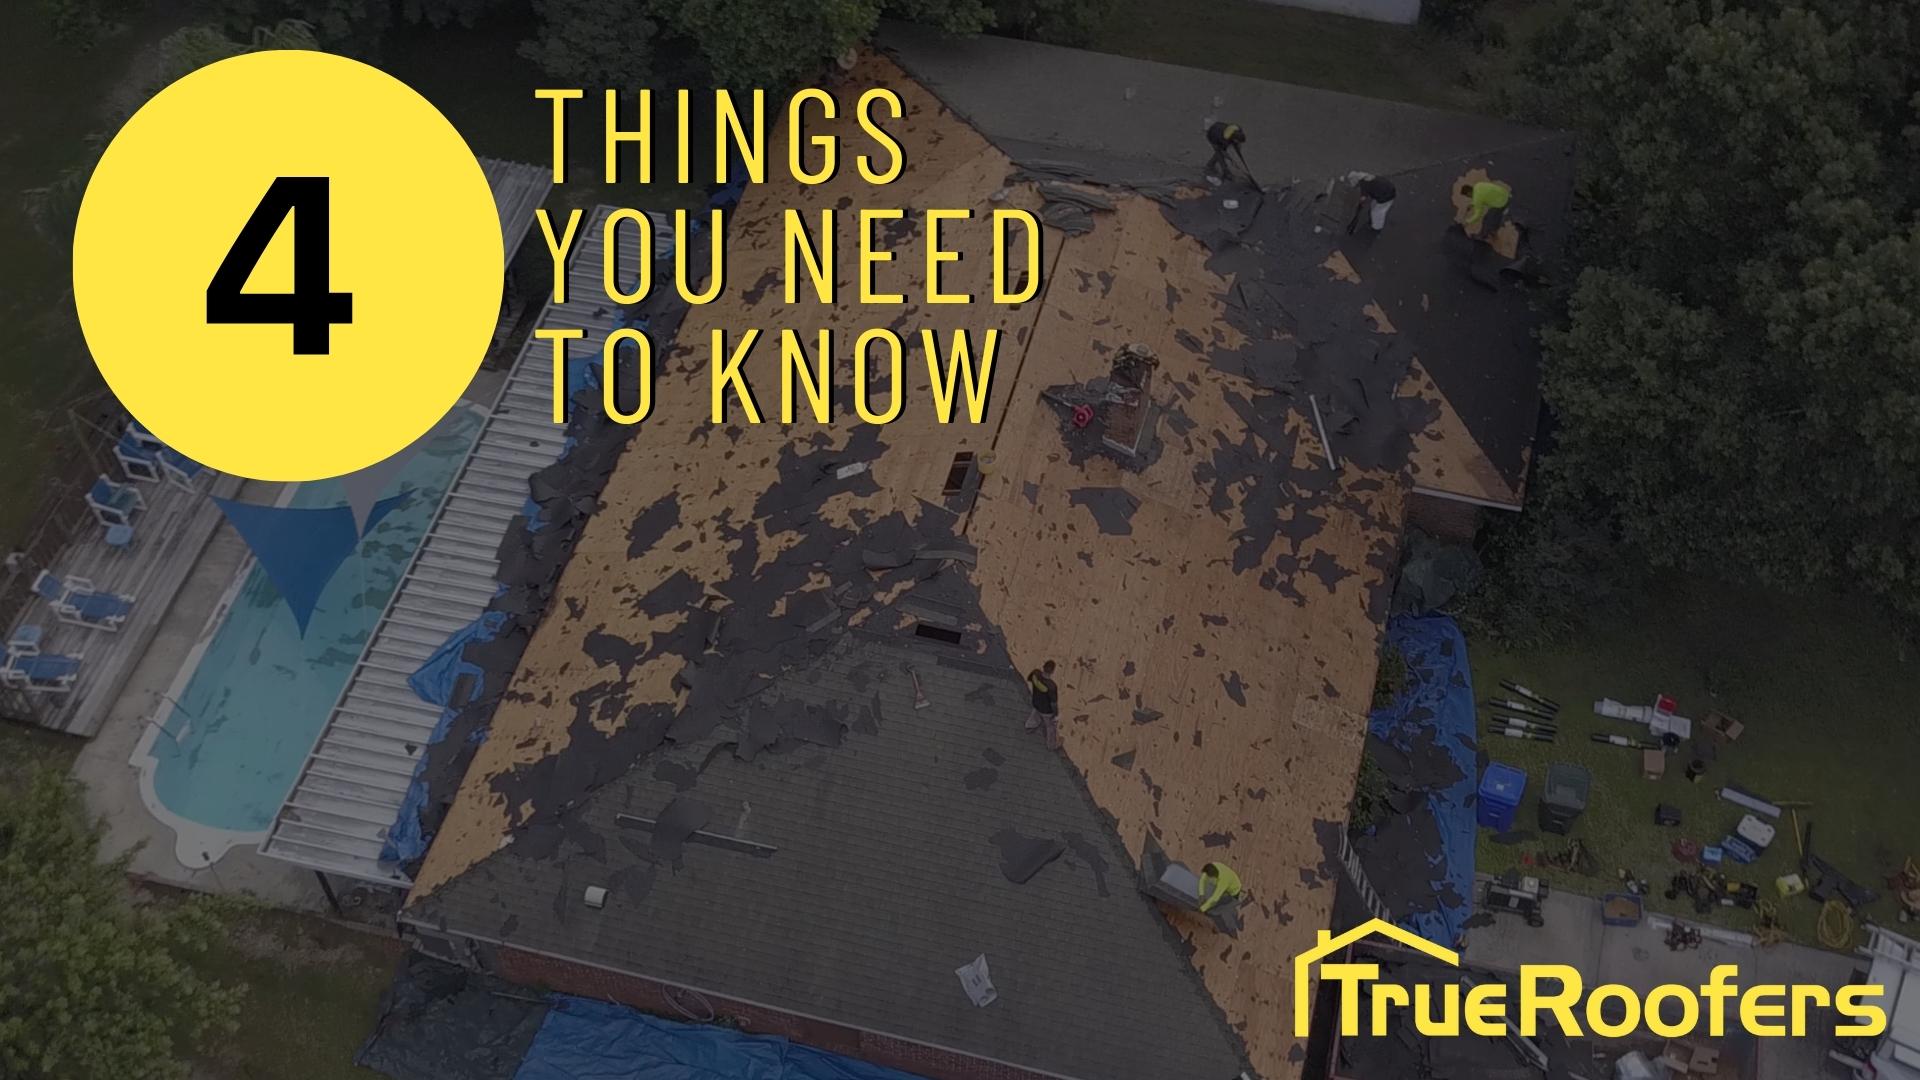 4 Things to Know Before Hiring A Roofing Company